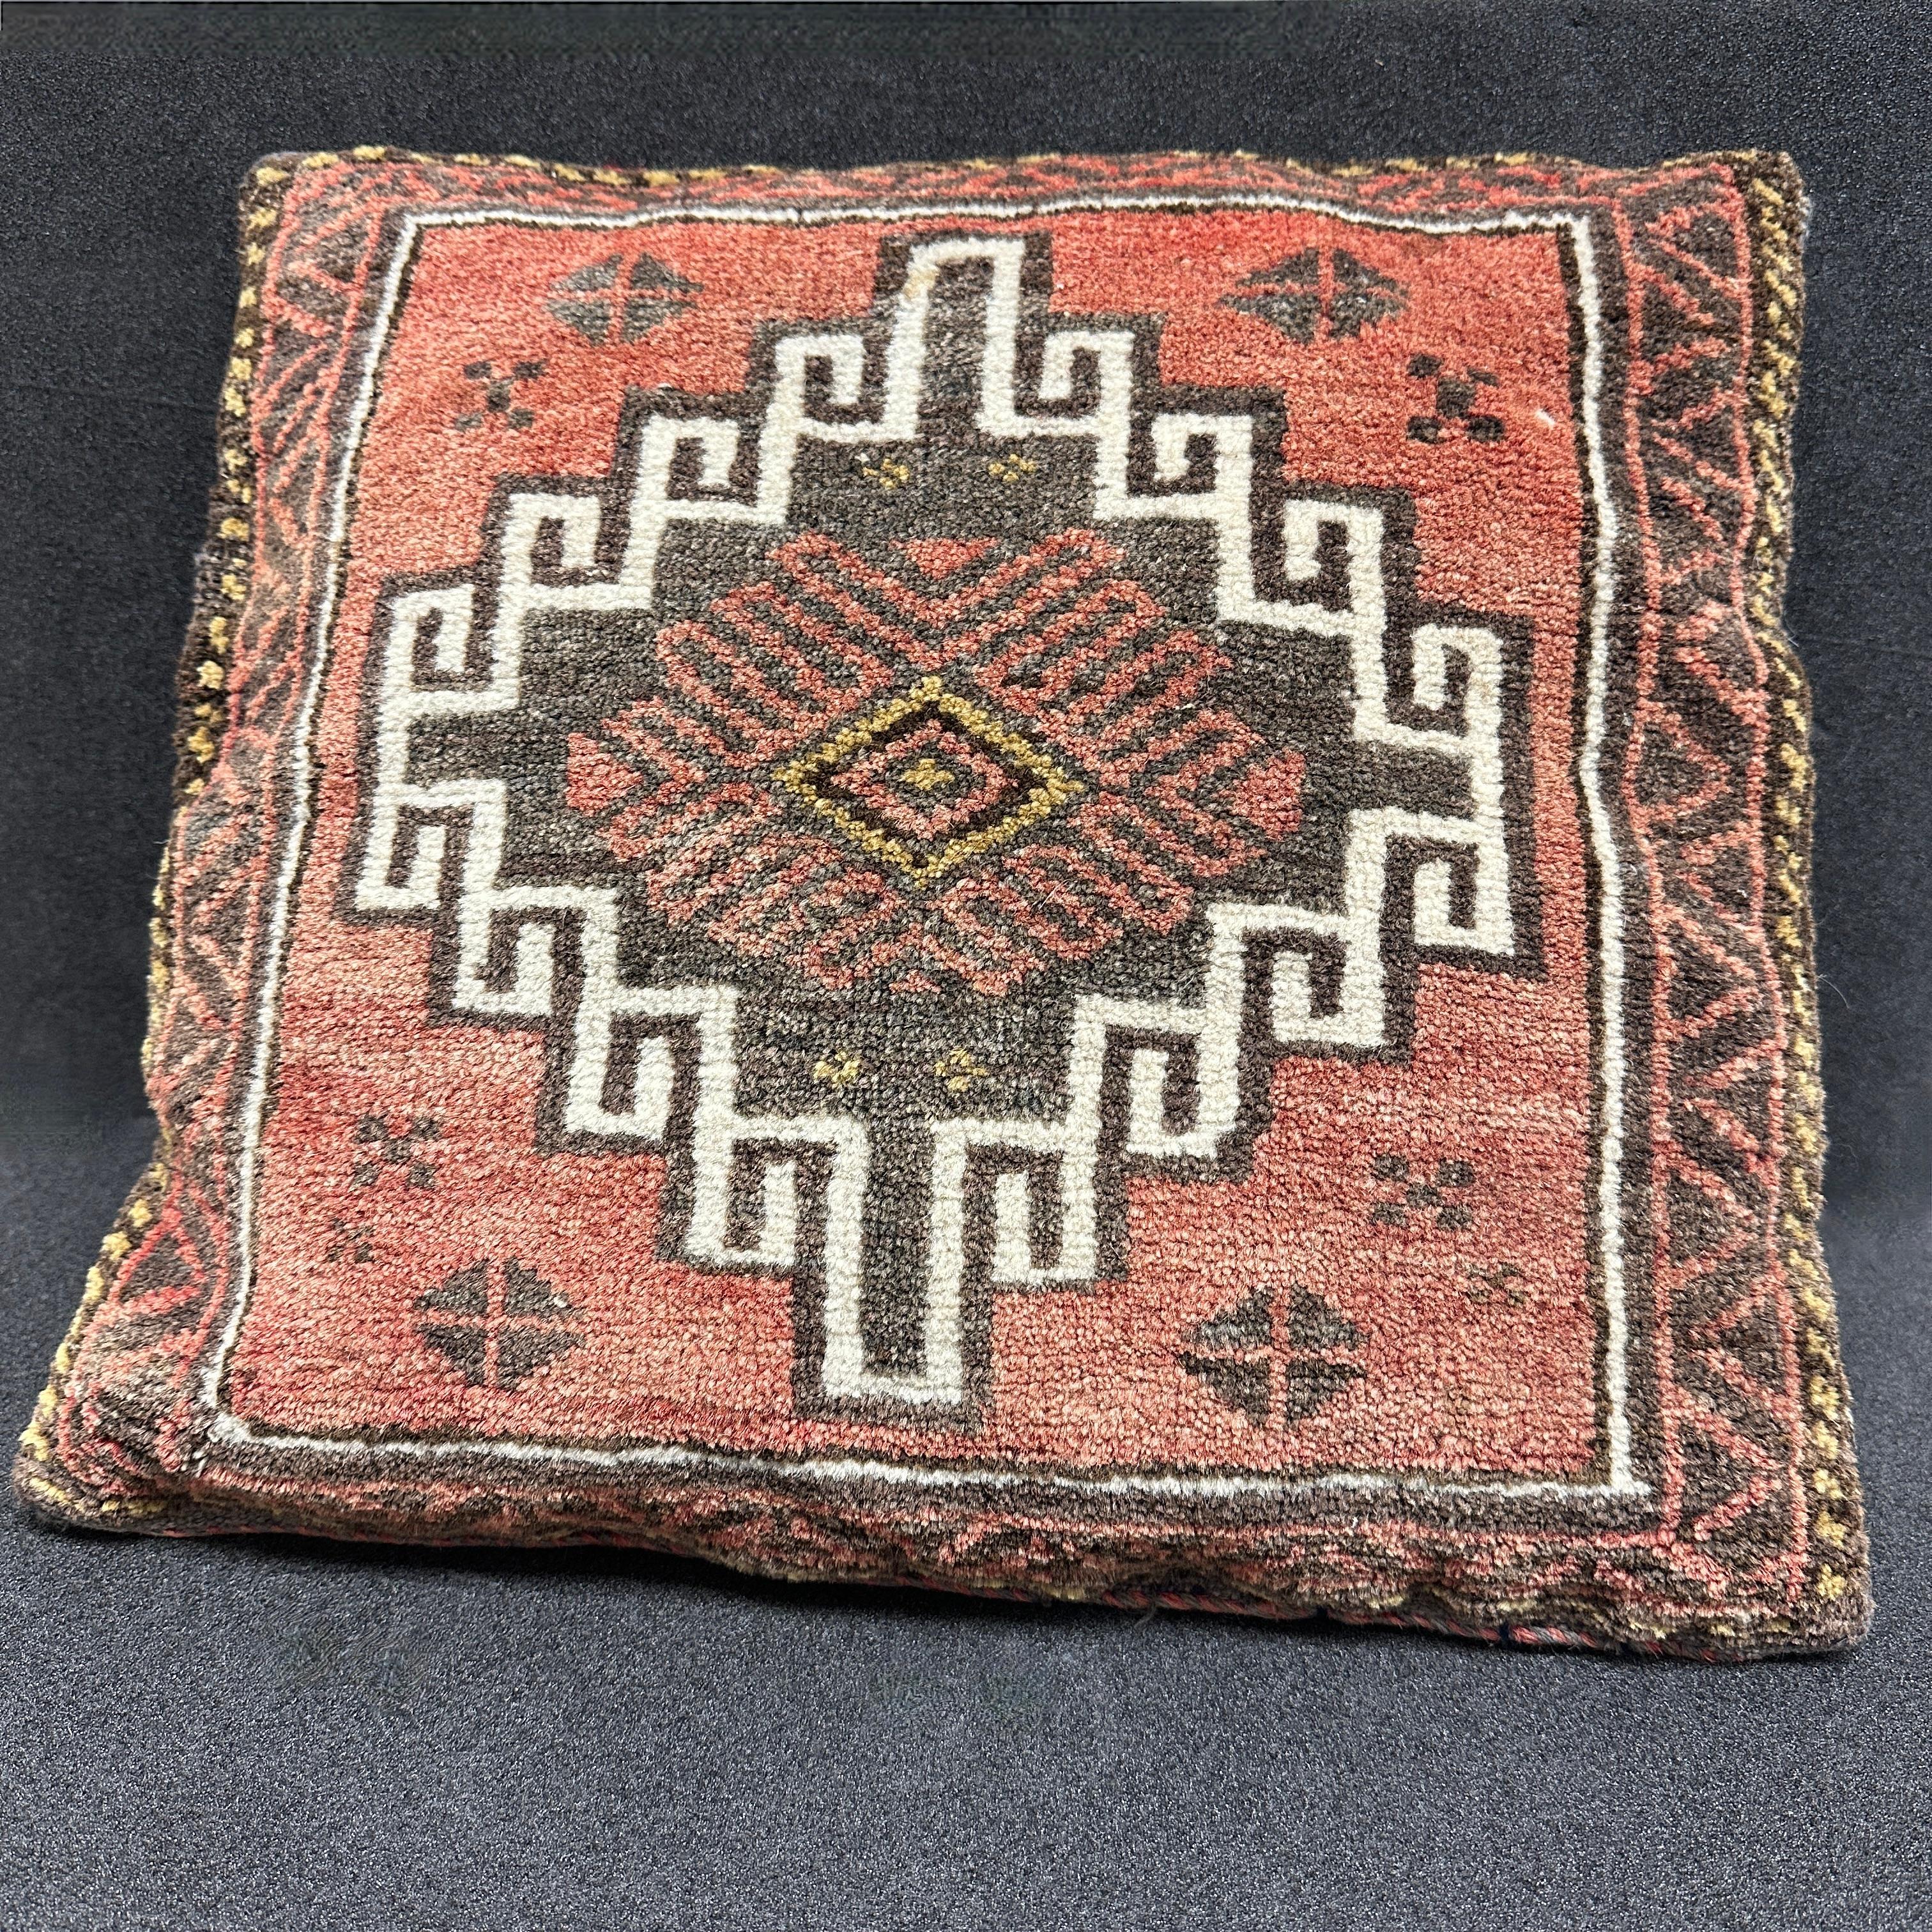 Gorgeous oriental pillow, cushion or seat pillow. Original vintage cushions made from Oriental rugs. Estimated to date from the 1950s/1960s, the cushions themselves are vintage made (not recently made from vintage rugs) as can be seen by the